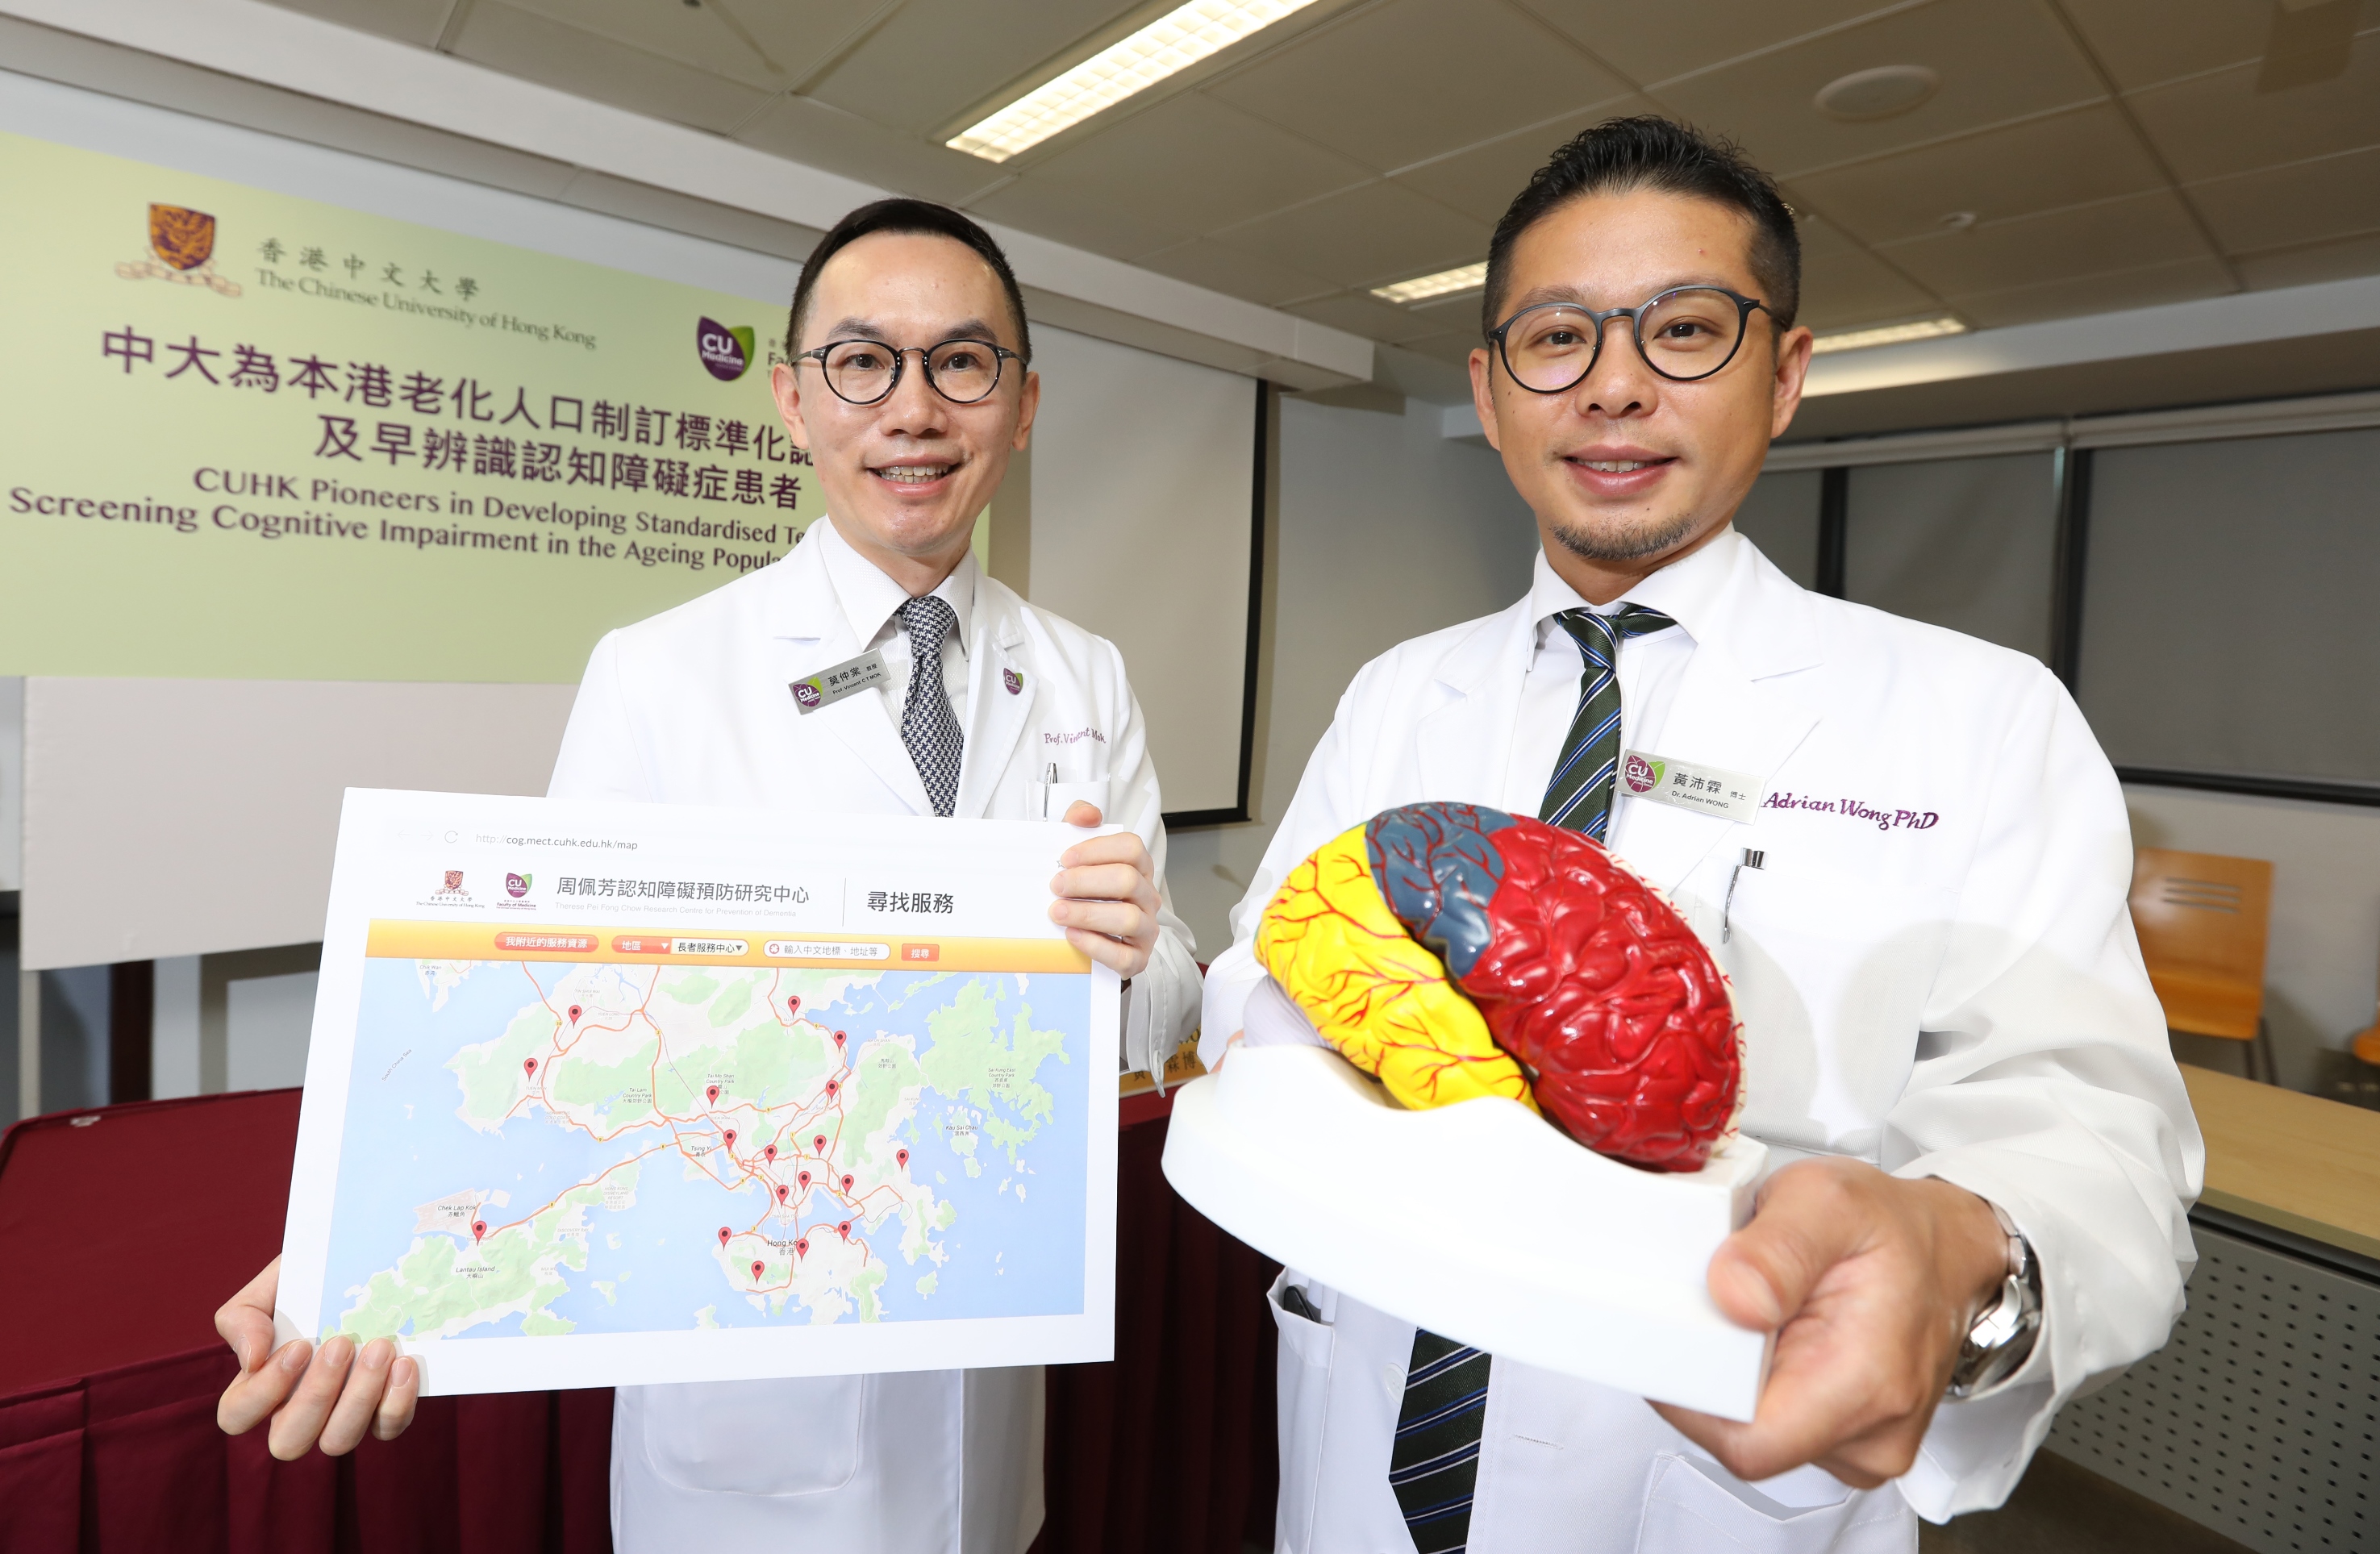 The Faculty of Medicine at CUHK developed and validated two standardised tests for early detection of people suffering from dementia. The two tests are “Montreal Cognitive Assessment Hong Kong Version (HK-MoCA)” and “Montreal Cognitive Assessment 5-Minute Protocol Hong Kong Version (HK-MoCA 5-Min Protocol)”. (From left: Prof. Vincent Chung Tong MOK, Mok Hing Yiu Professor of Medicine and Head of Division of Neurology, Department of Medicine & Therapeutics, Faculty of Medicine at CUHK and Dr. Adrian WONG, Research Assistant Professor and Clinical Psychologist of Division of Neurology, Department of Medicine and Therapeutics, Faculty of Medicine at CUHK)